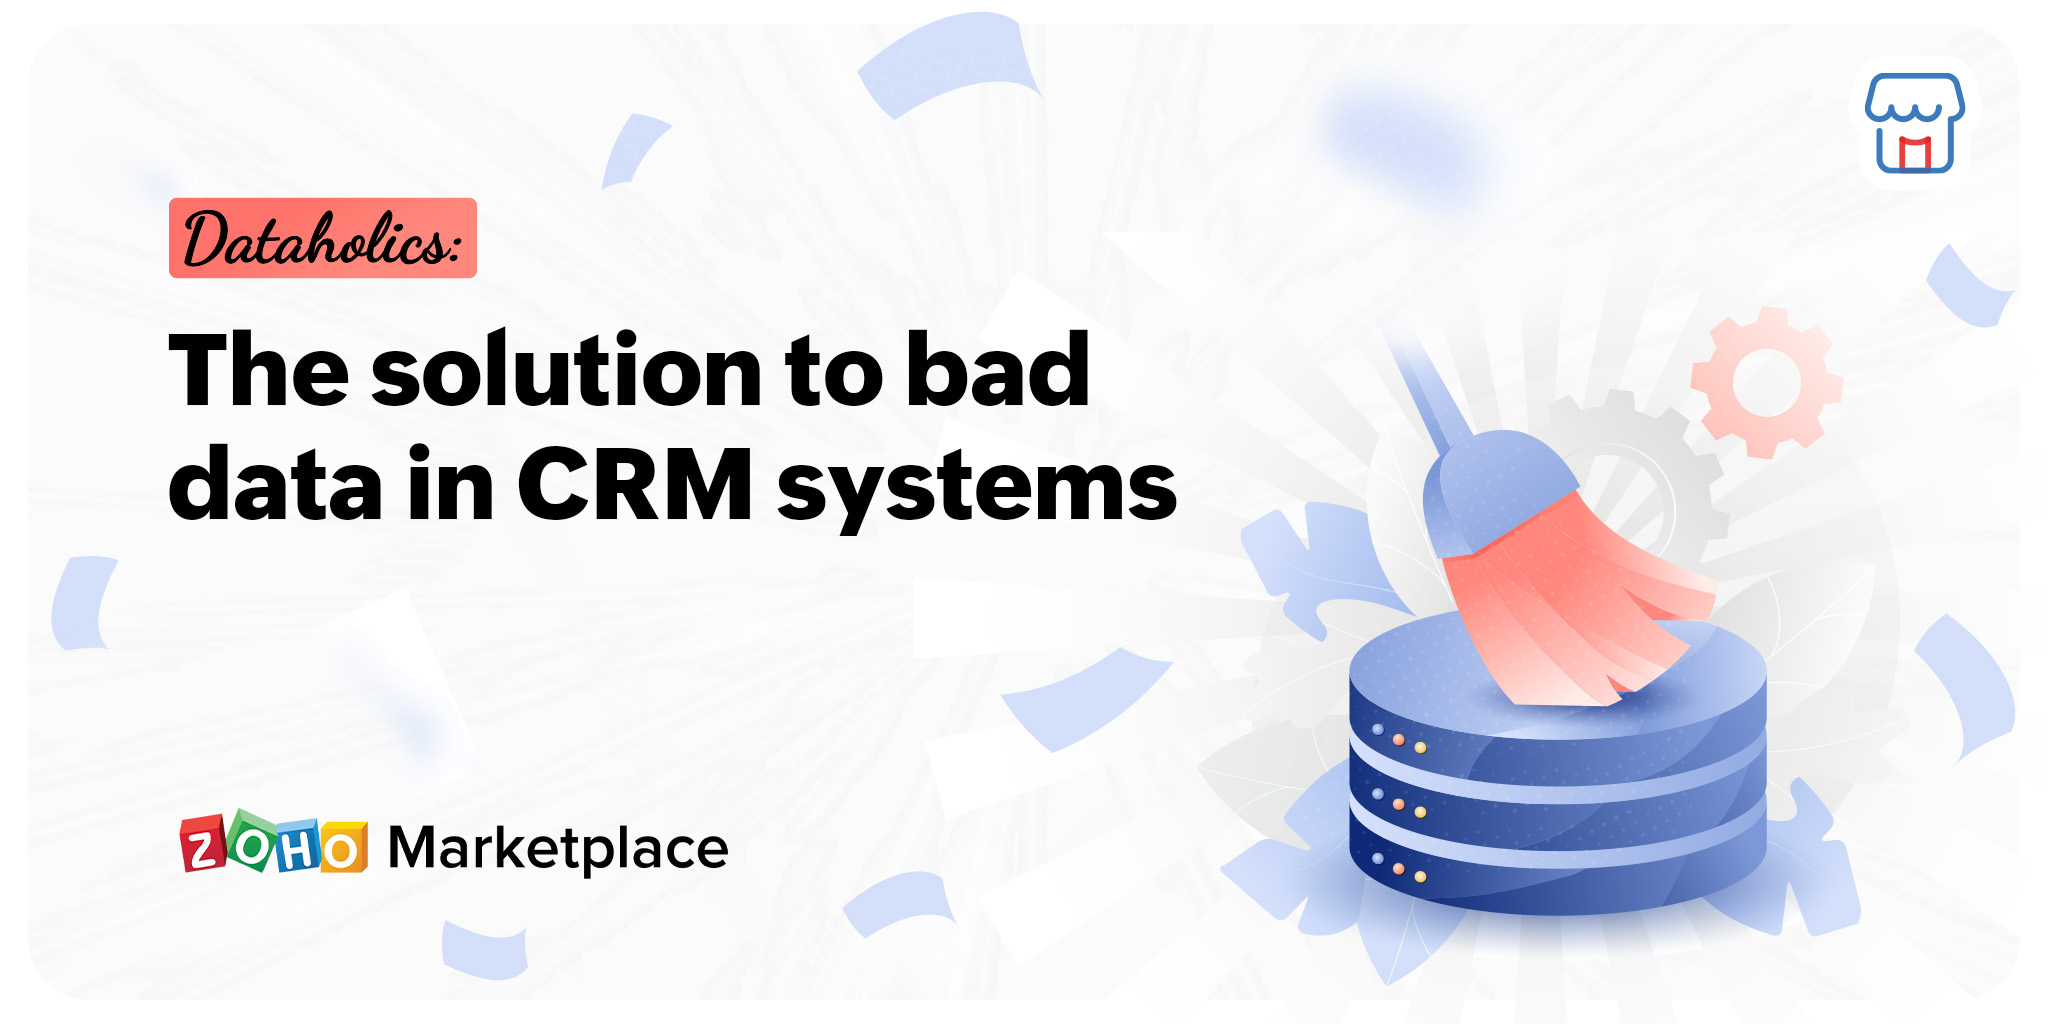 Dataholics: The solution to bad data in CRM systems